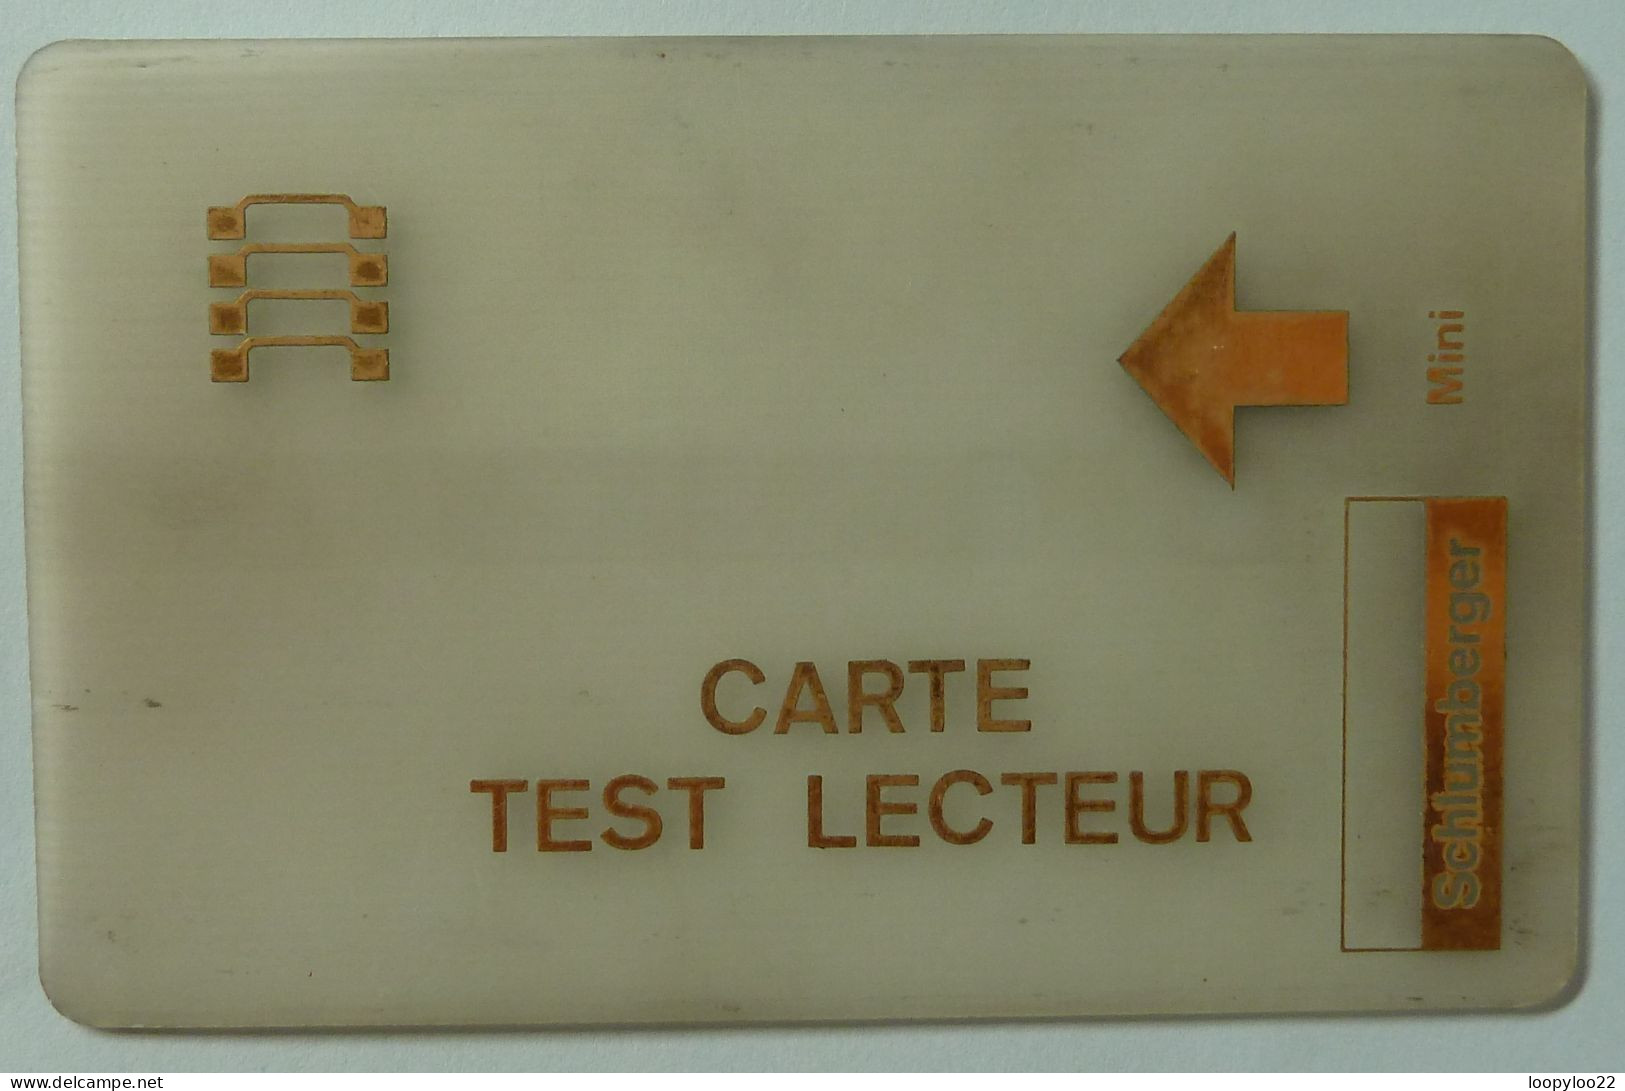 FRANCE - Test For Schlumberger - CARTE TEST LECTEUR - Used For Circuit Testing - R - Ohne Zuordnung